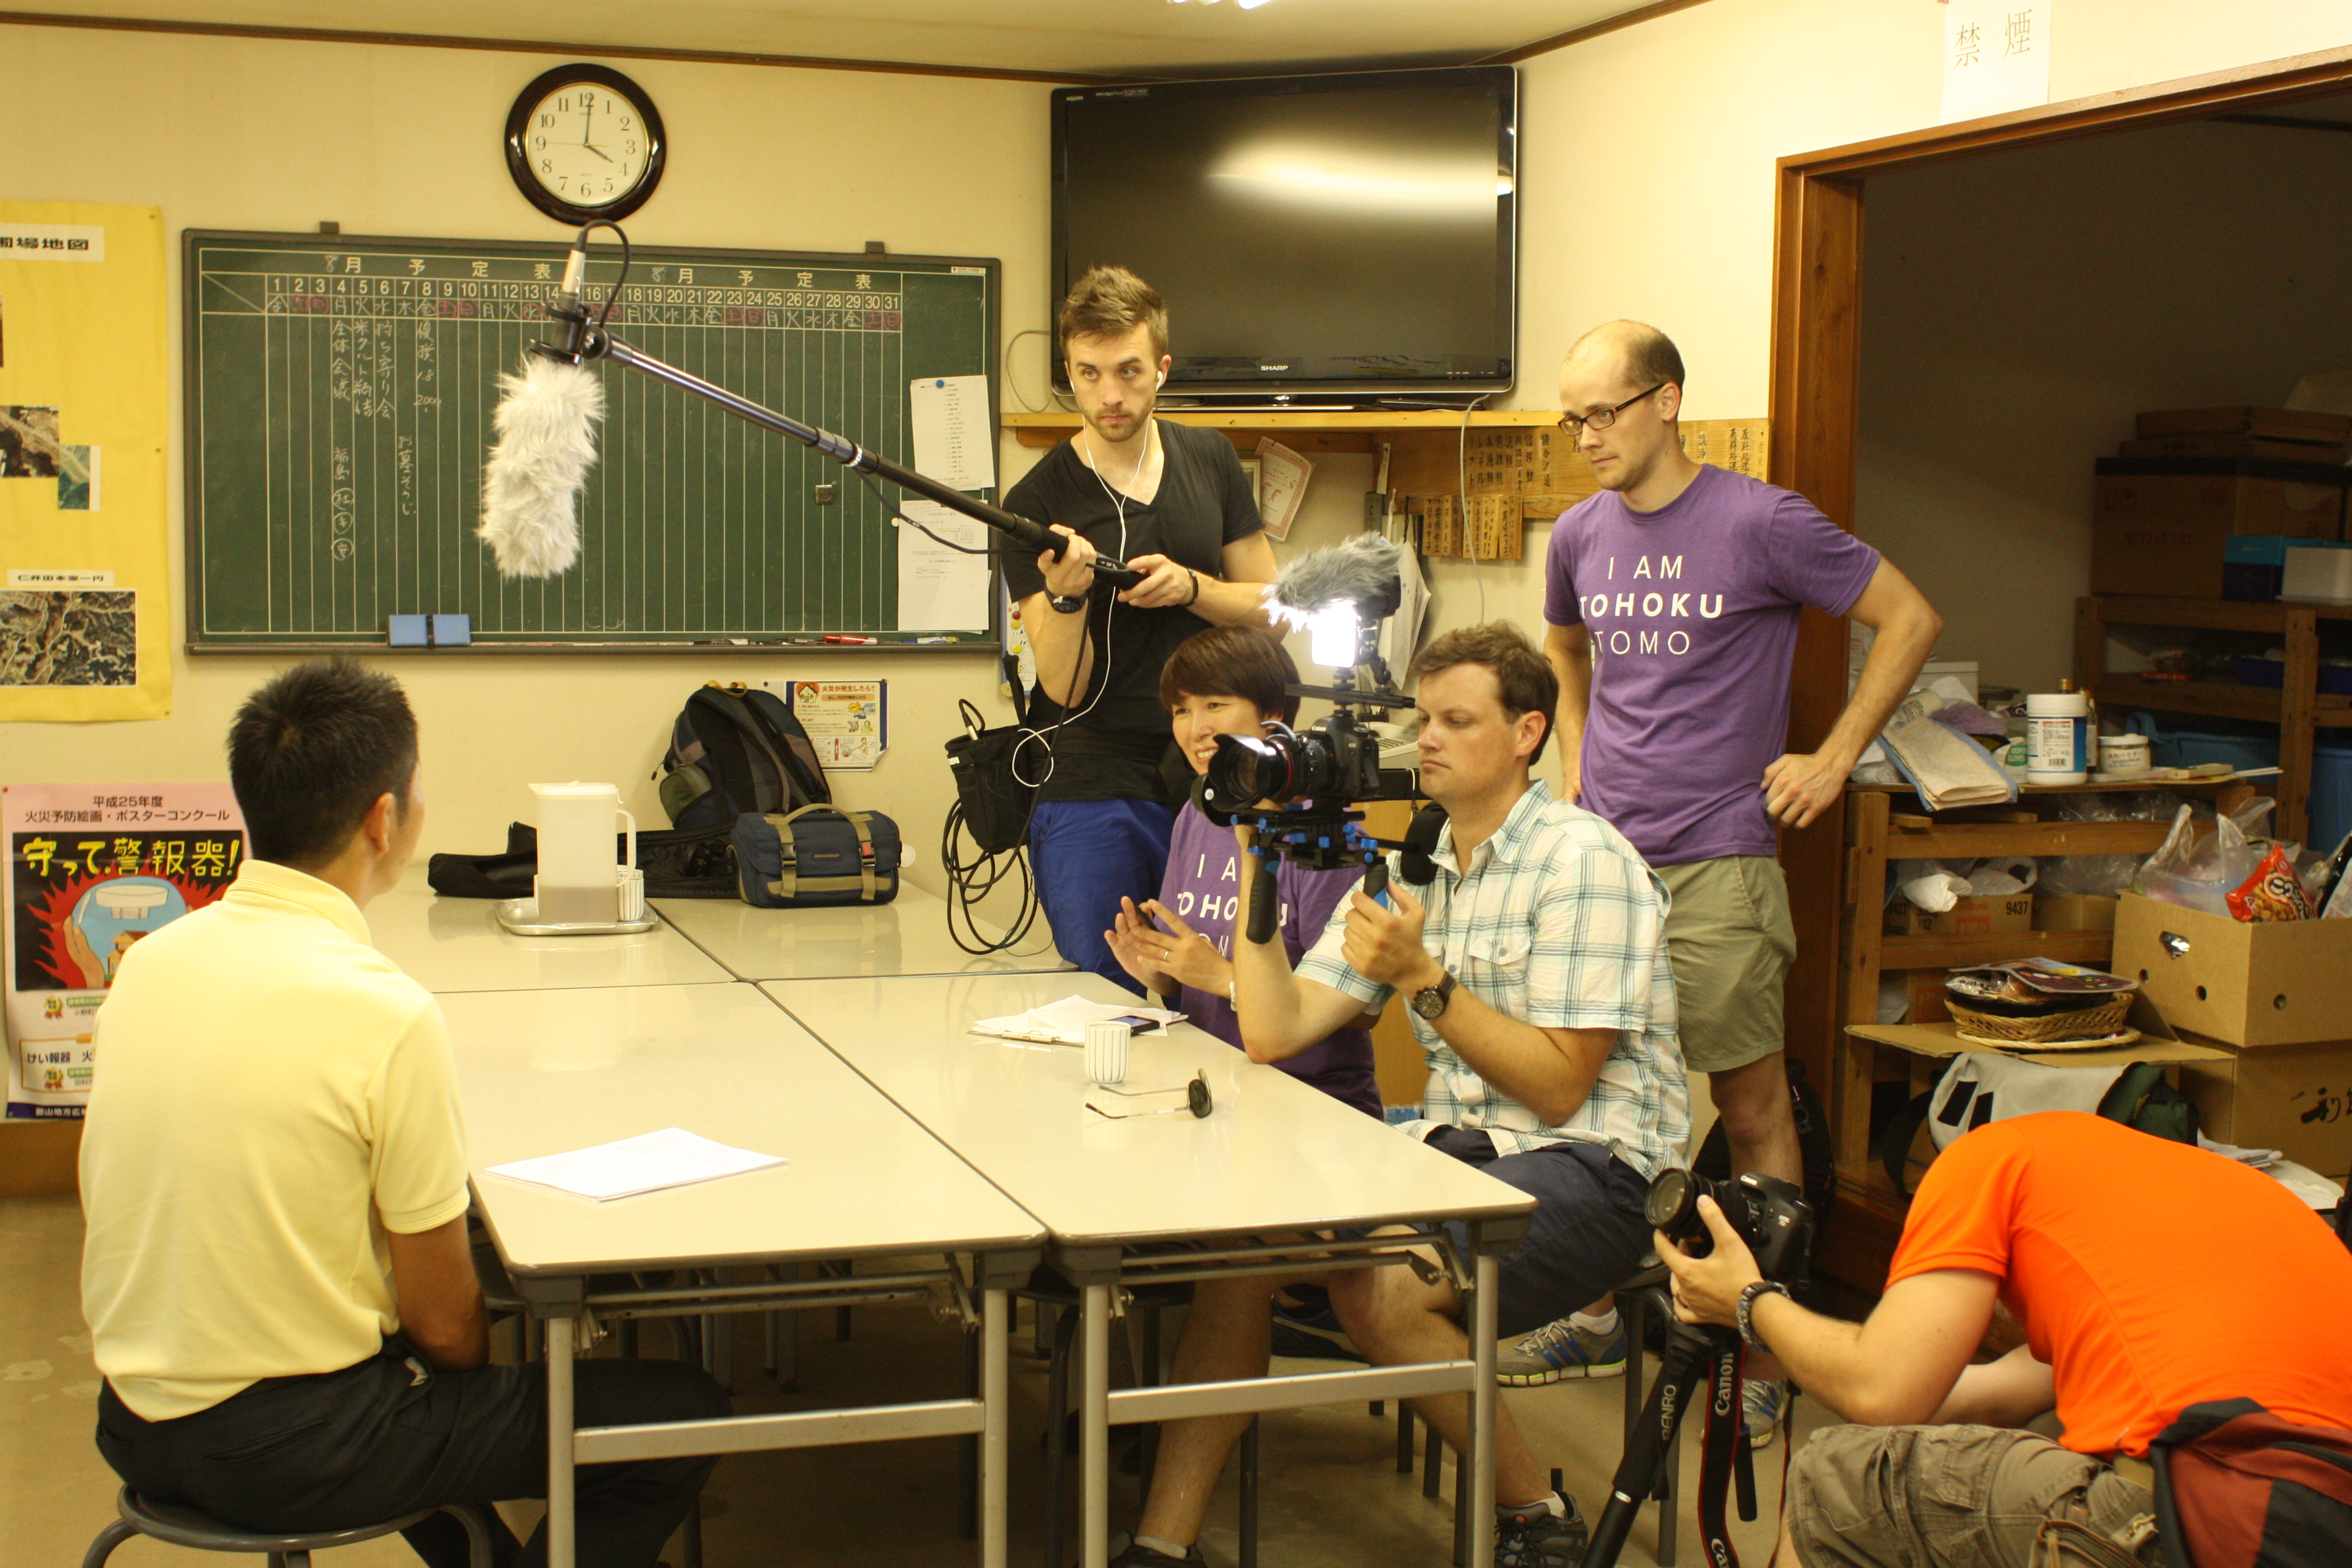 Wesley Julian (right, in the purple T-shirt) works with his crew during a shoot for this 113 Project. | COURTESY OF WESLEY JULIAN